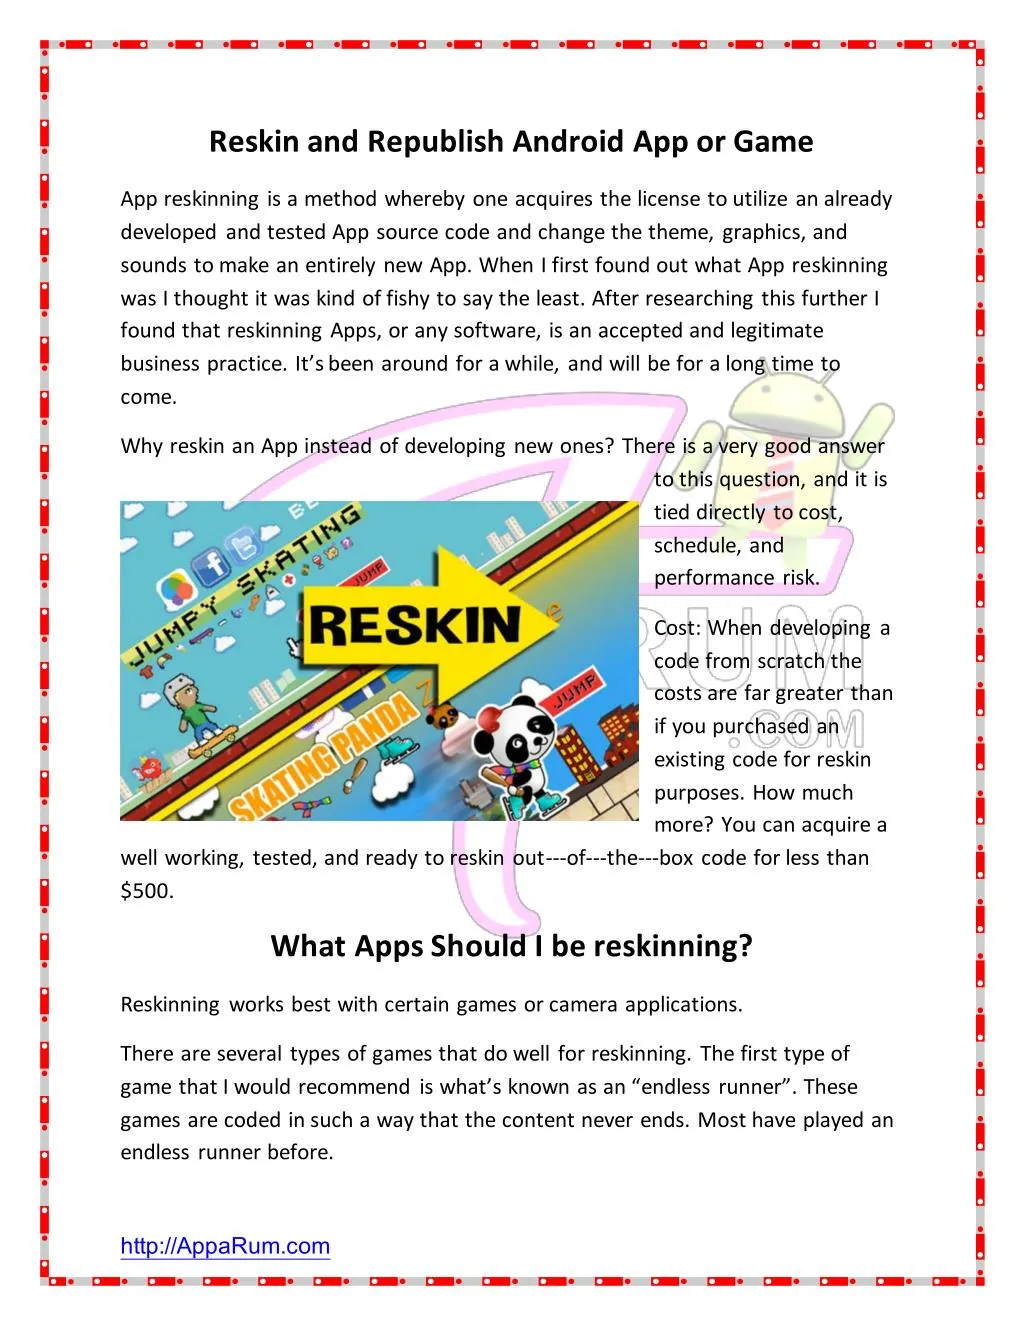 reskin and republish android app or game